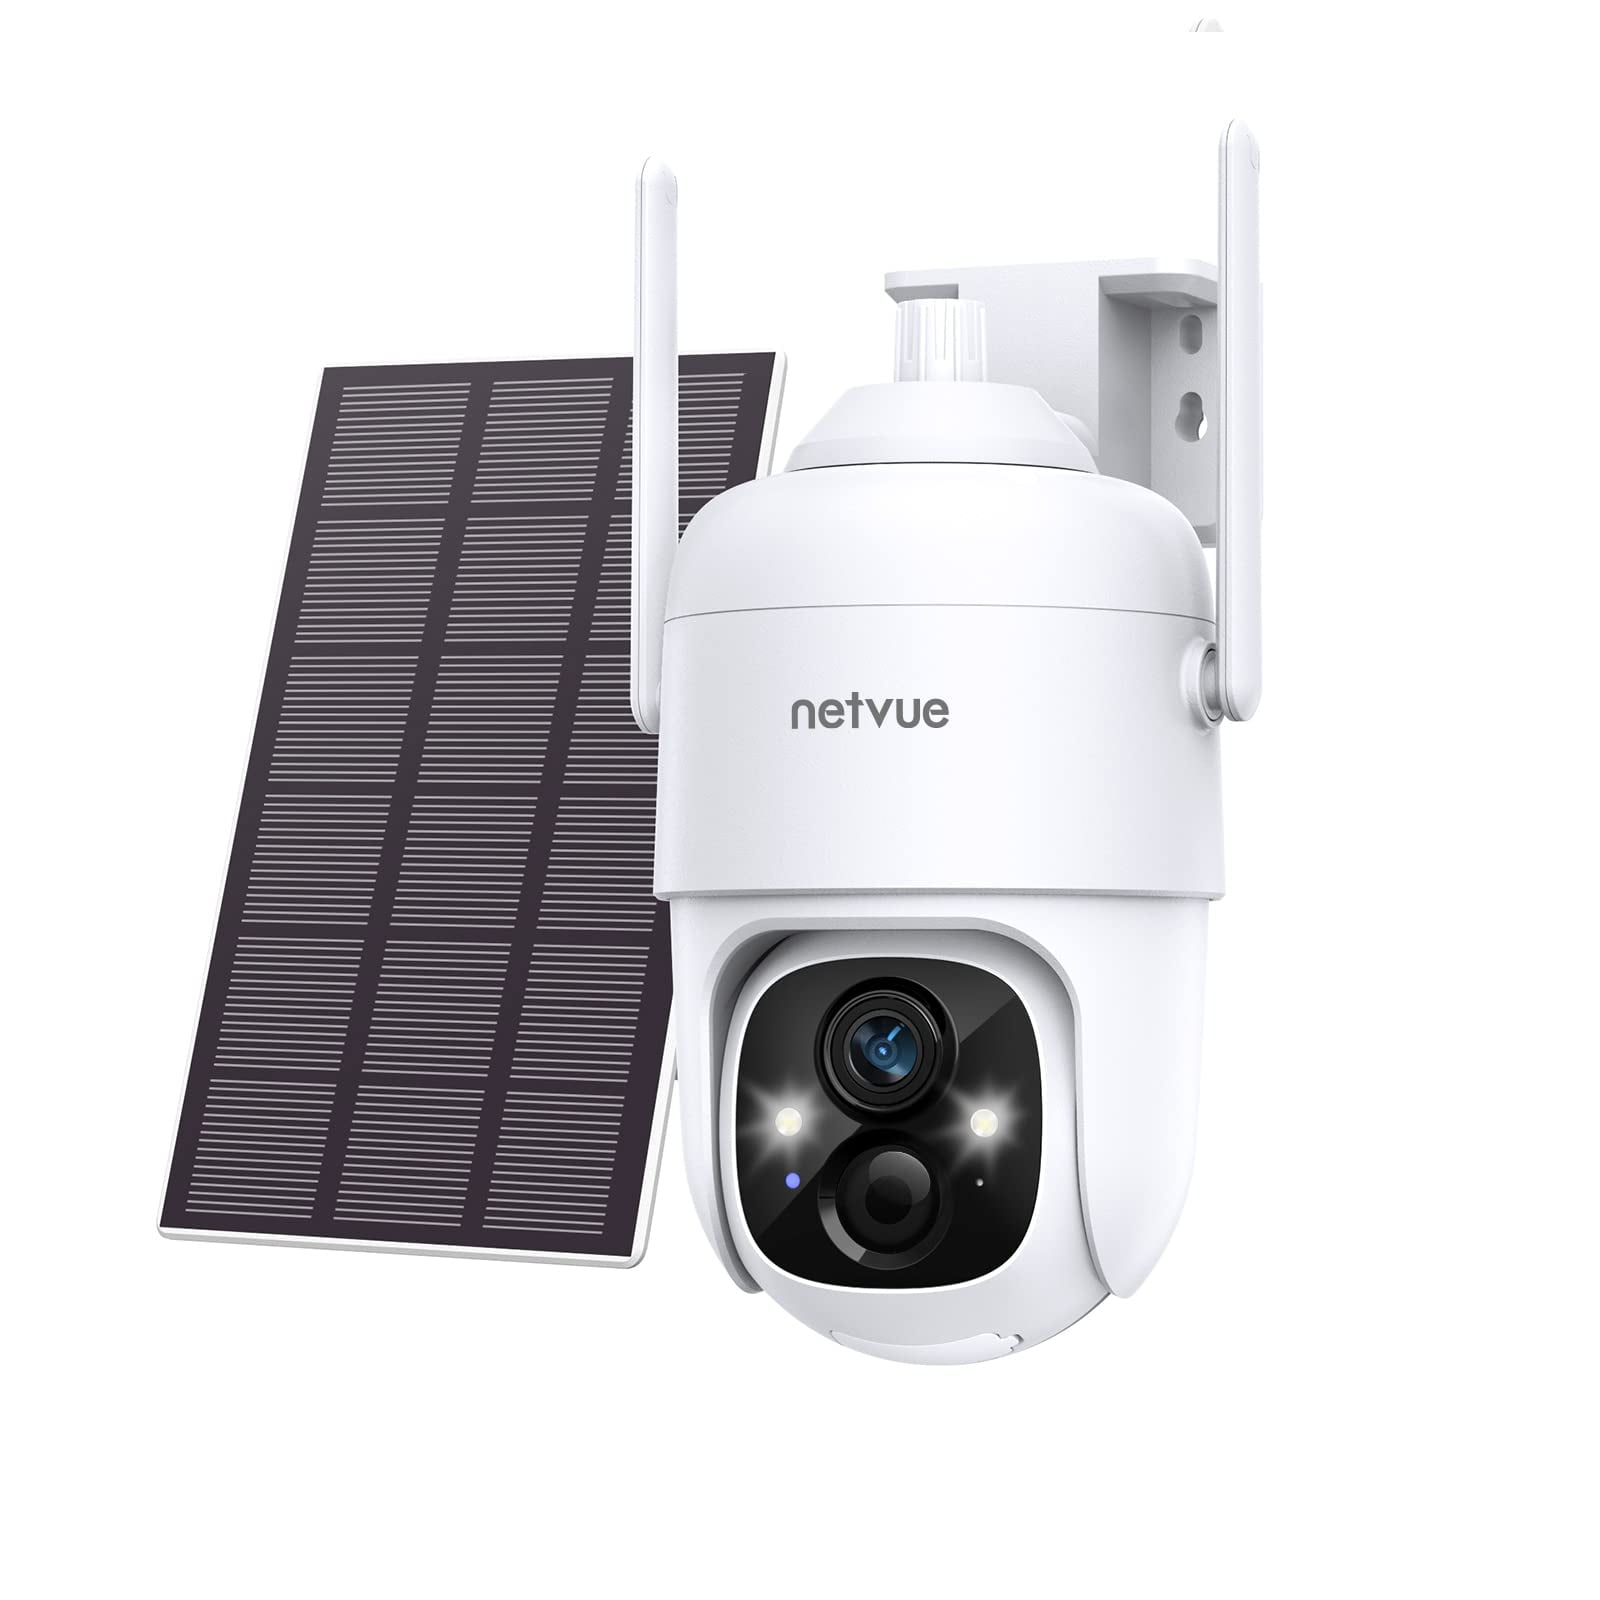 NETVUE Wireless Security Camera Outdoor, Rechargeable Battery Powered  Surveillance Cameras for Home Security, Smart AI Detection, IP66  Waterproof